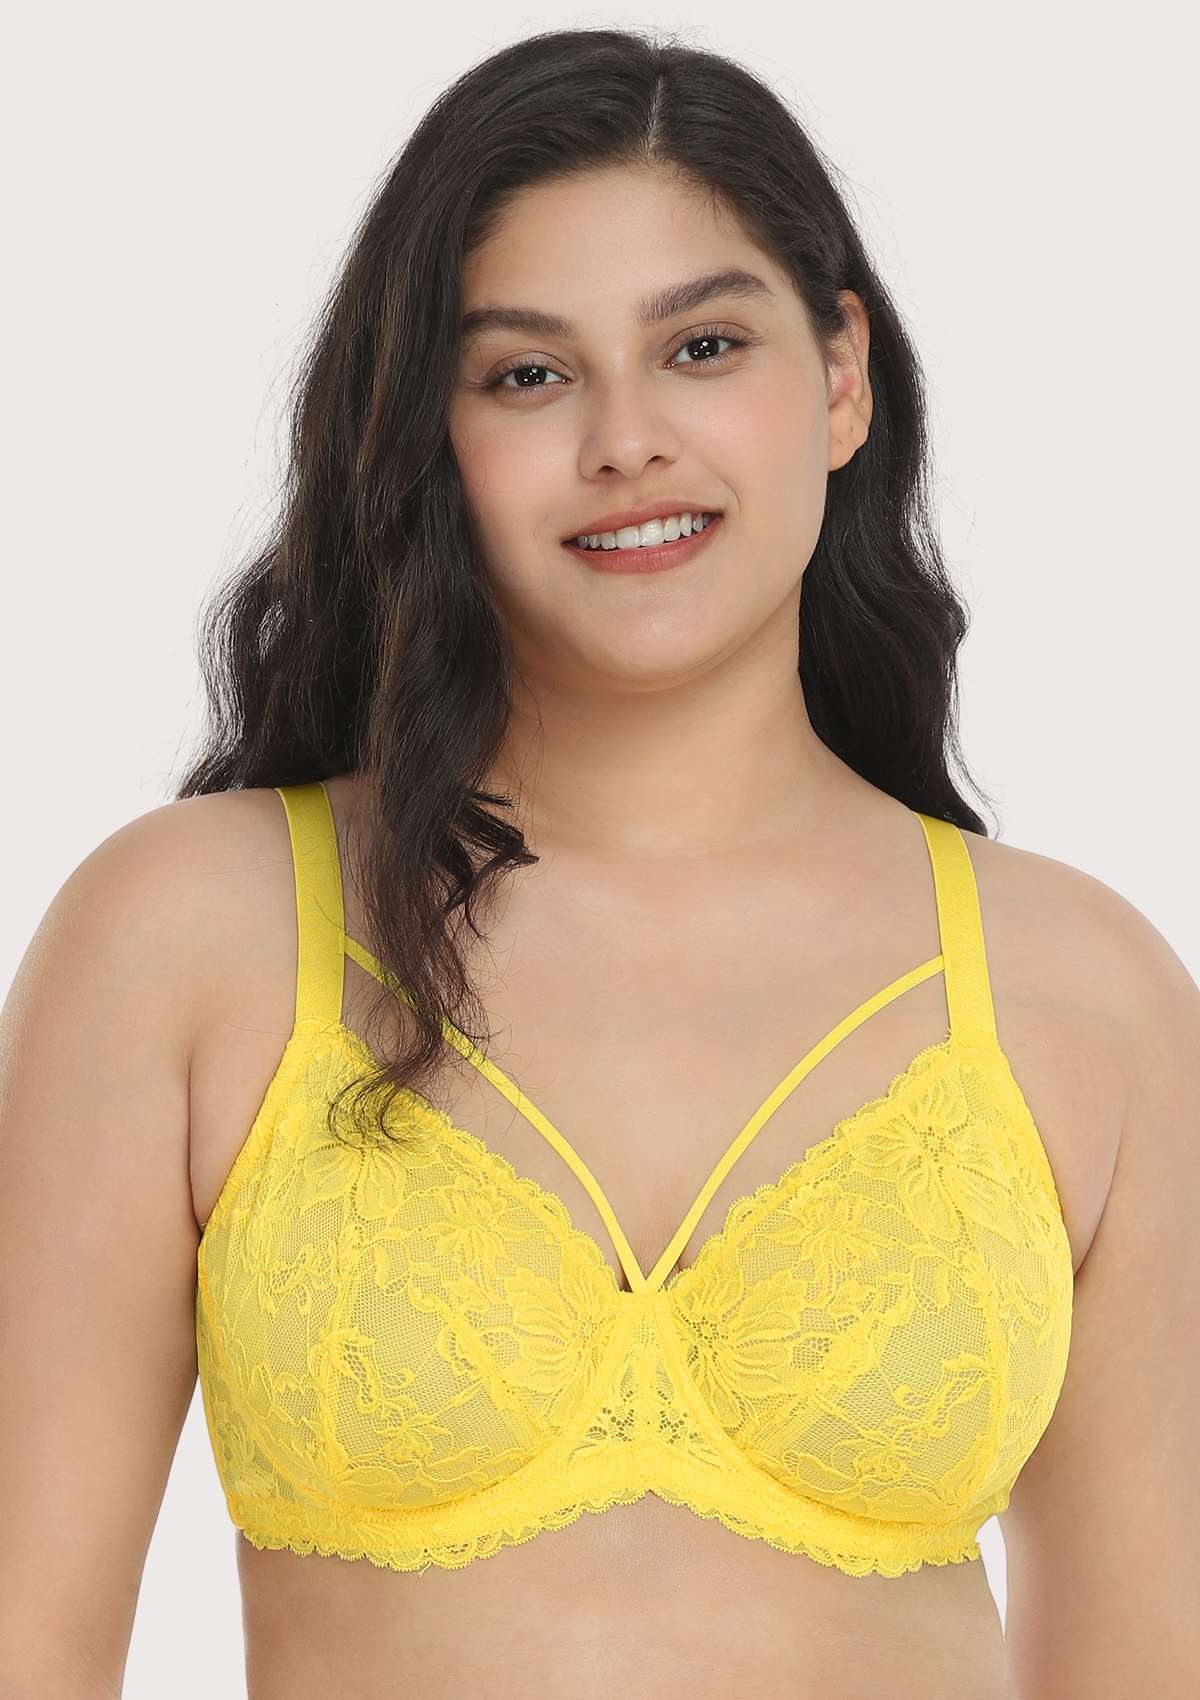 HSIA Unlined Lace Mesh Minimizer Bra For Large Breasts, Full Coverage - Bright Green / 34 / DDD/F